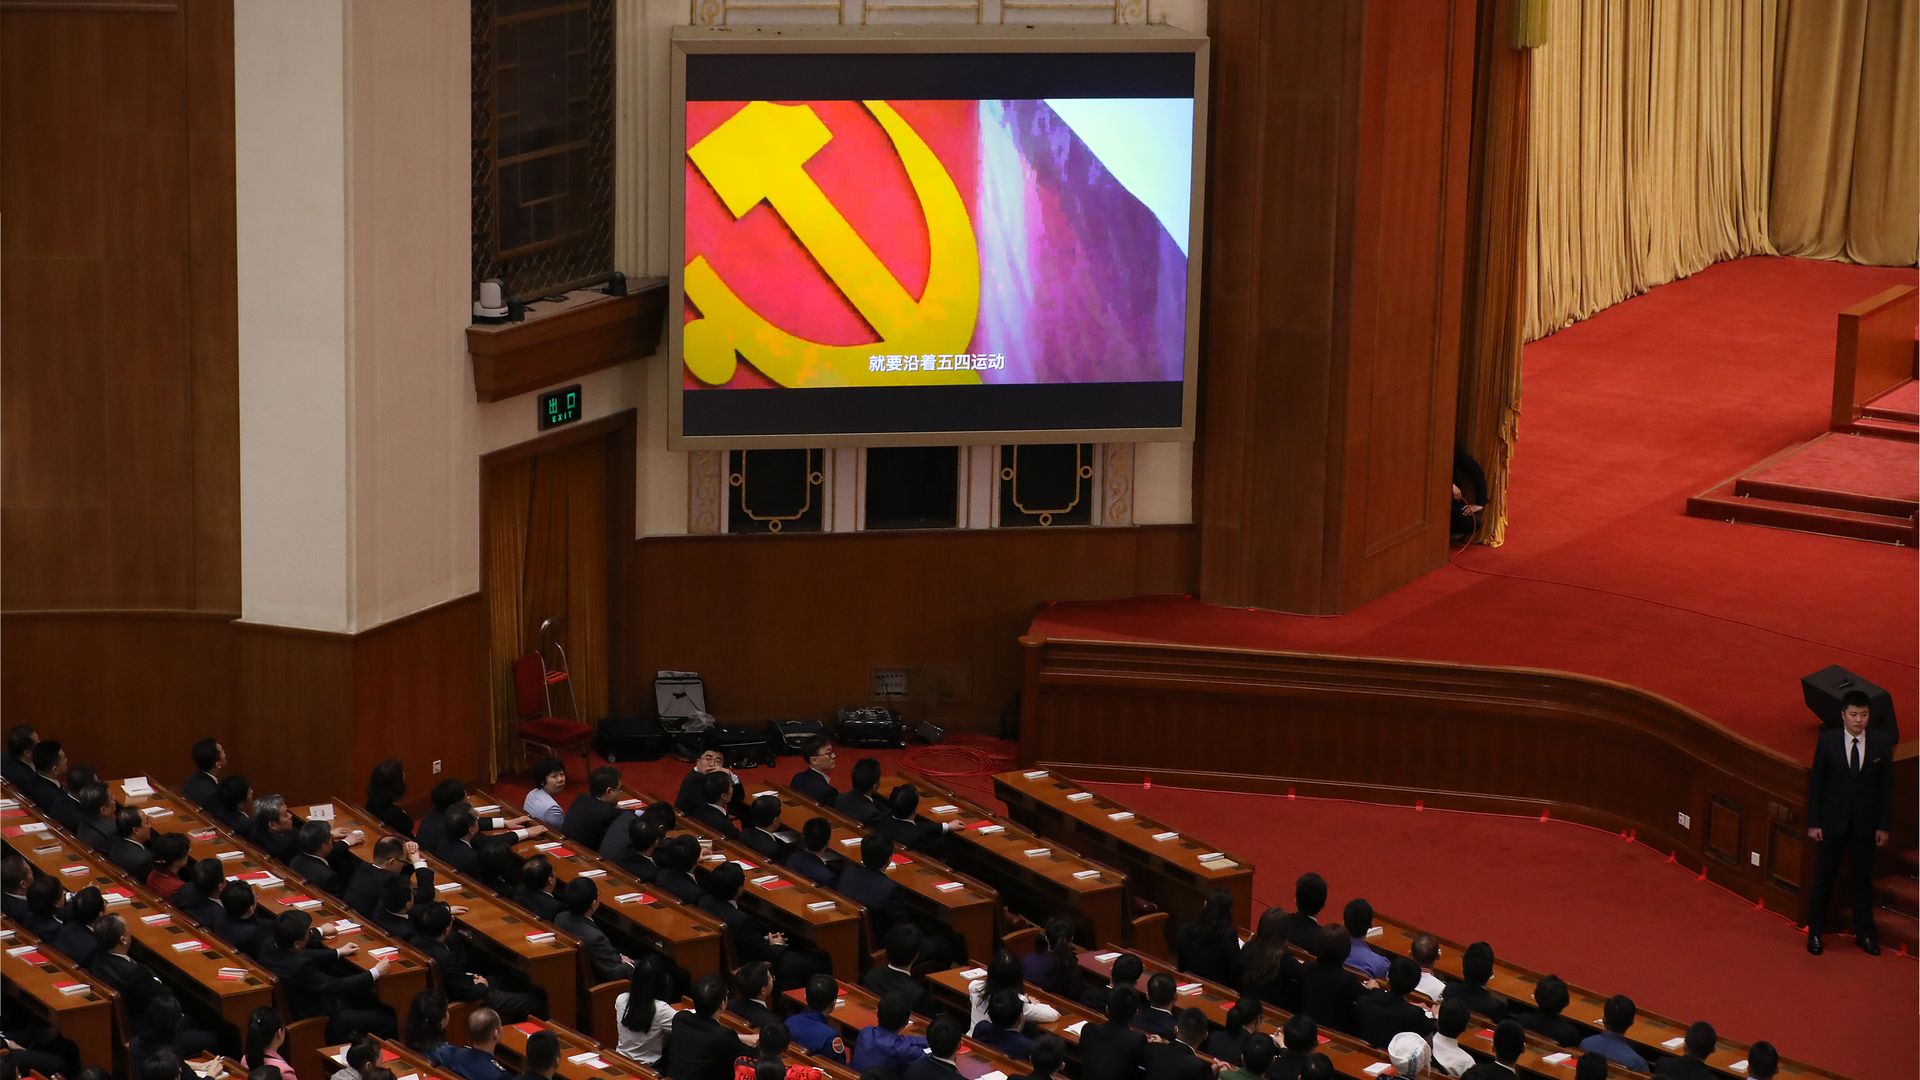  An audience watches a short film about the May 4th Movement at The Great Hall Of The People on April 30 in Beijing.